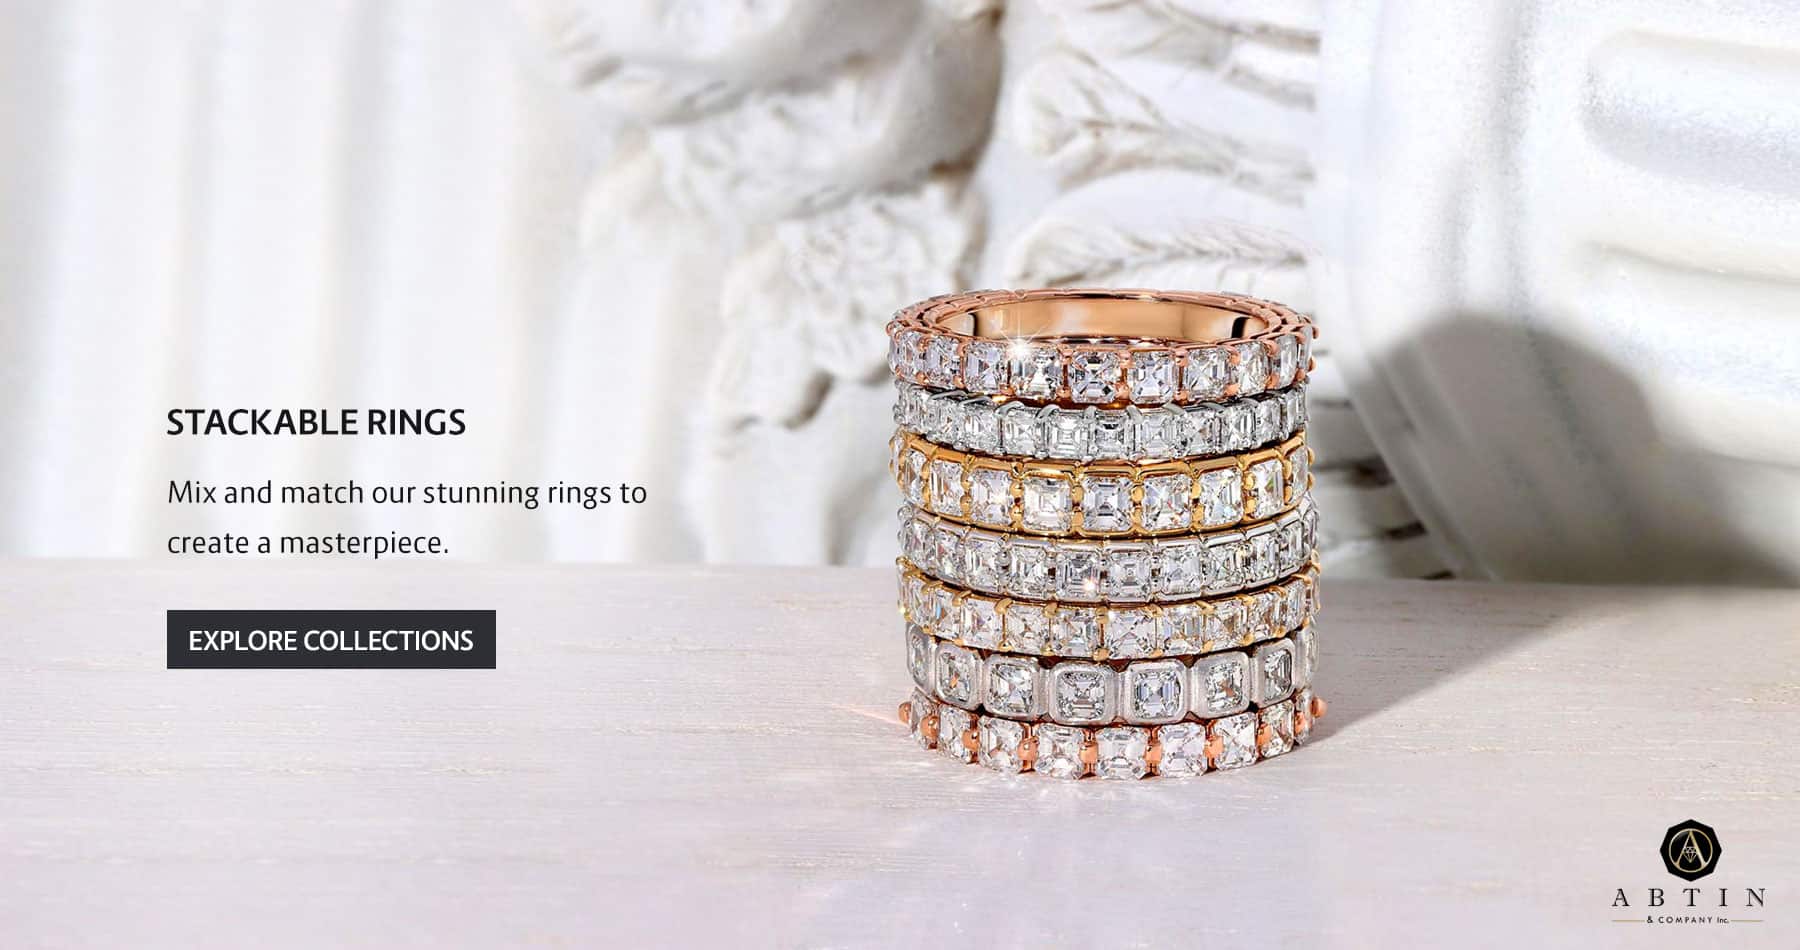 Abtin and Co Stackable Rings at Tulsa Diamond House